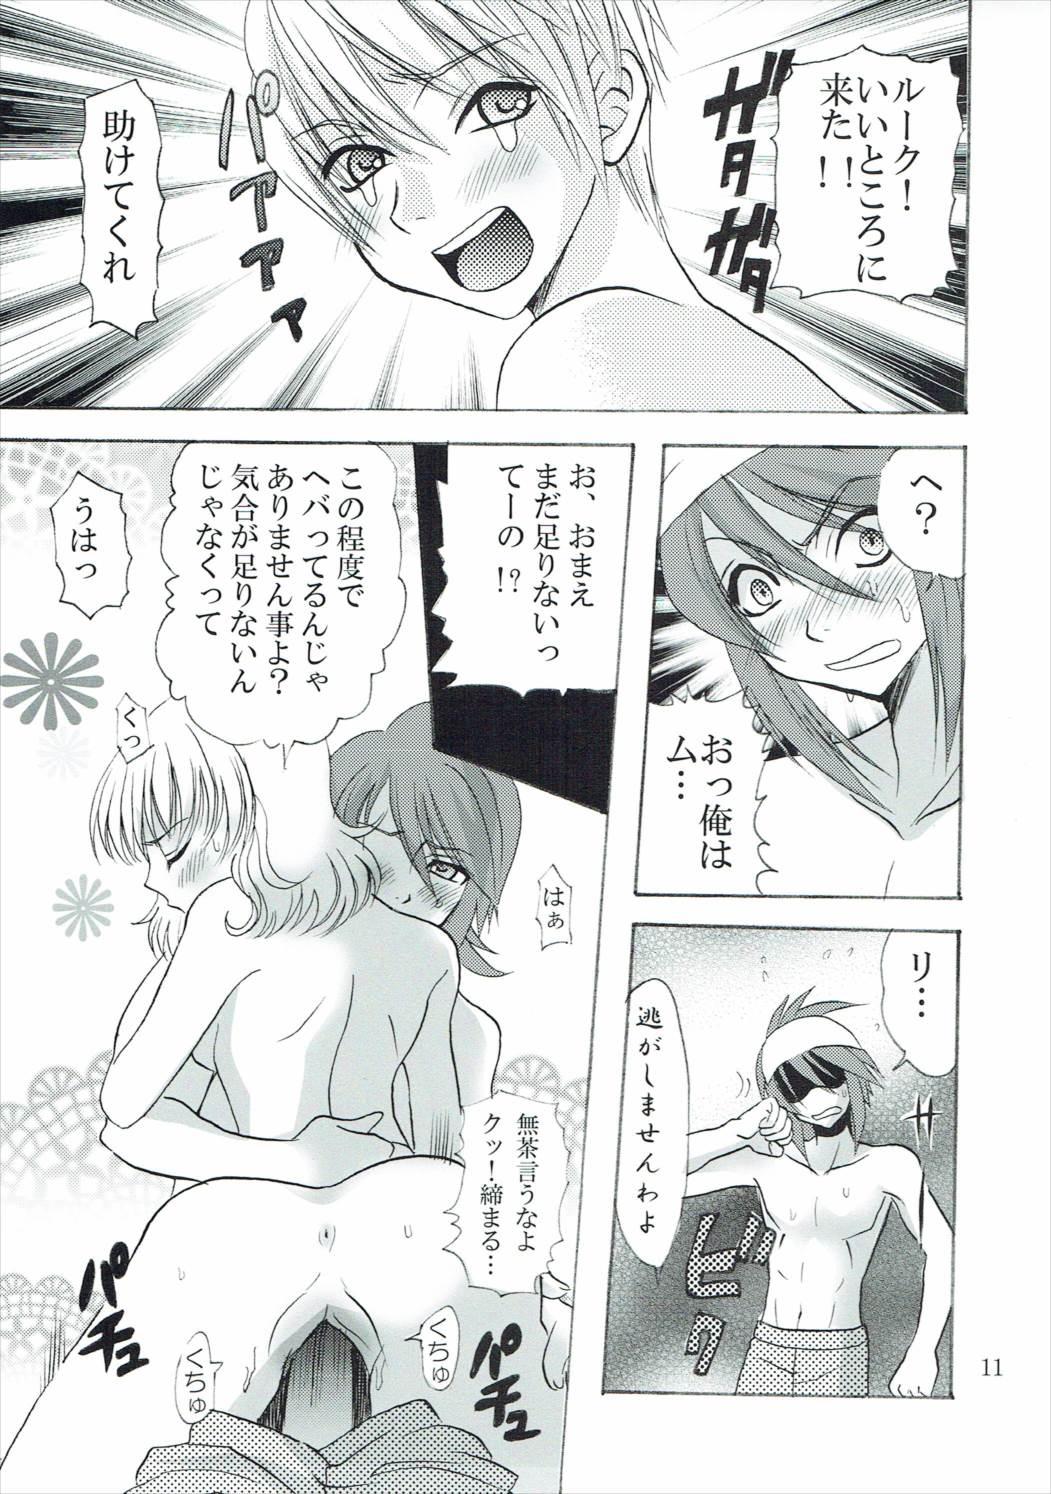 Transgender 興味津々お年頃 - Tales of the abyss Tgirl - Page 10